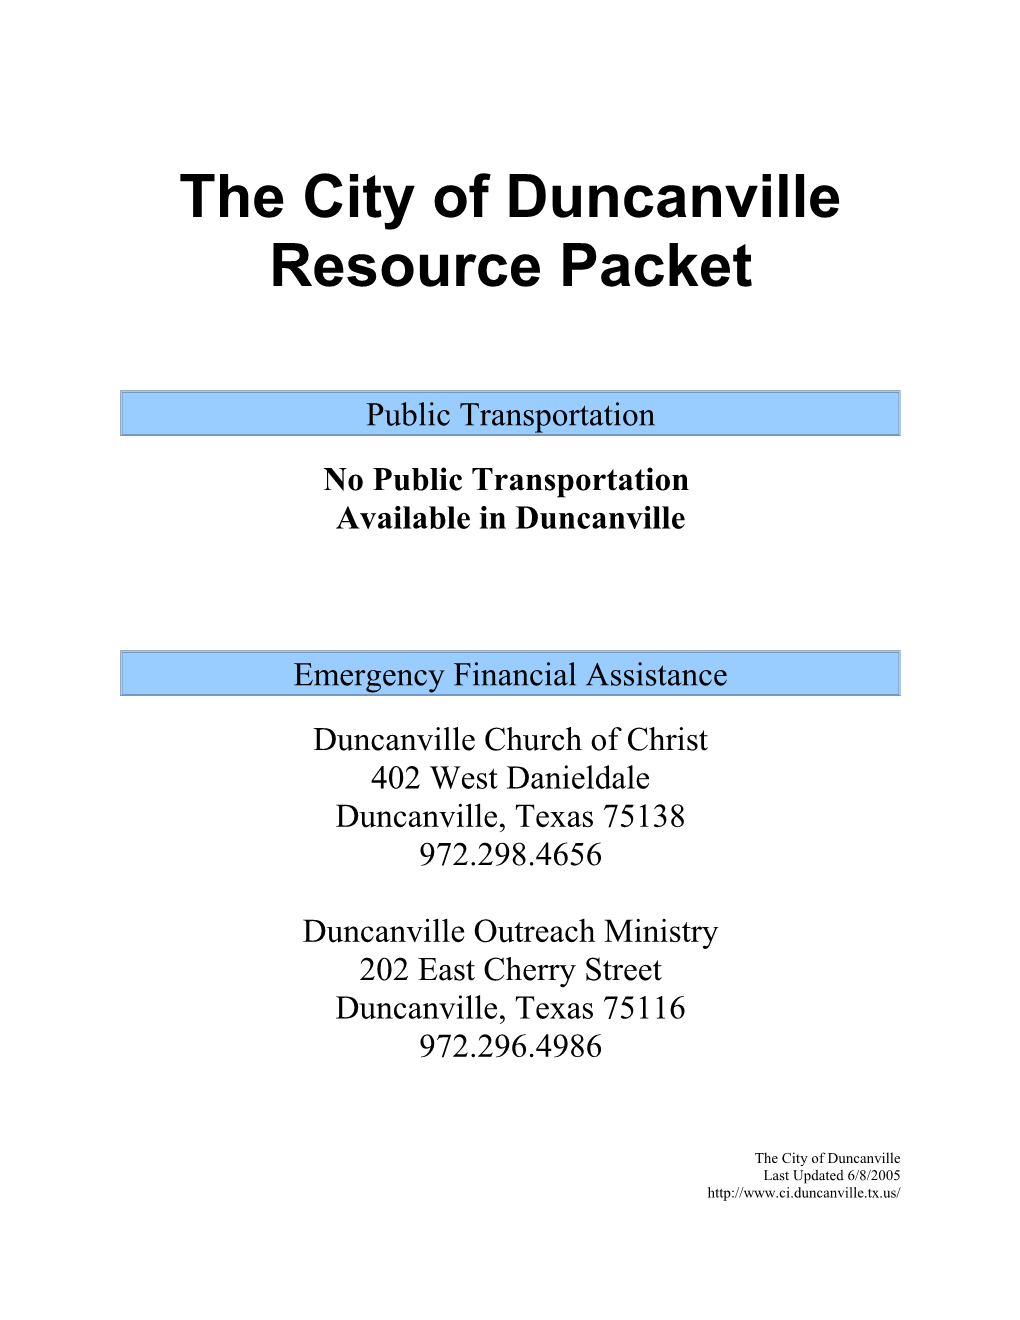 The City of Duncanville Resource Packet